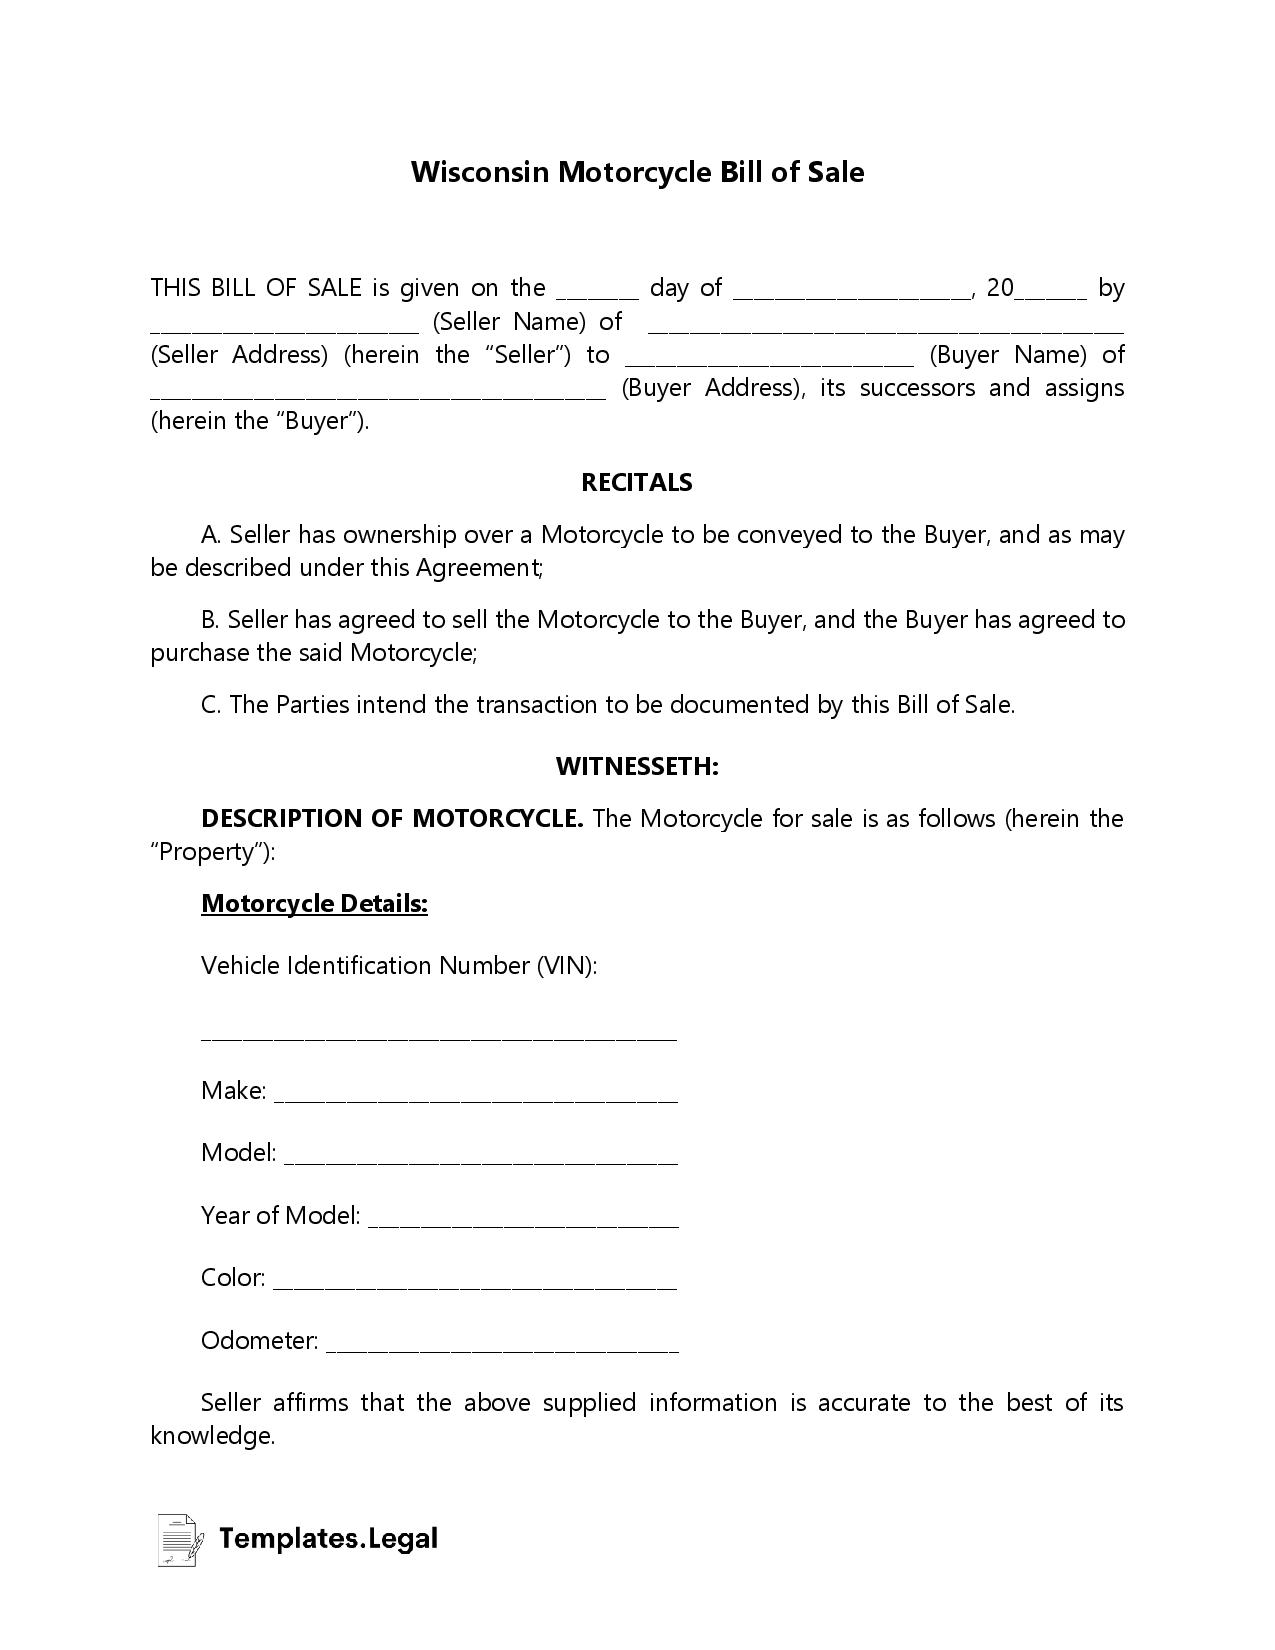 Wisconsin Motorcycle Bill of Sale - Templates.Legal